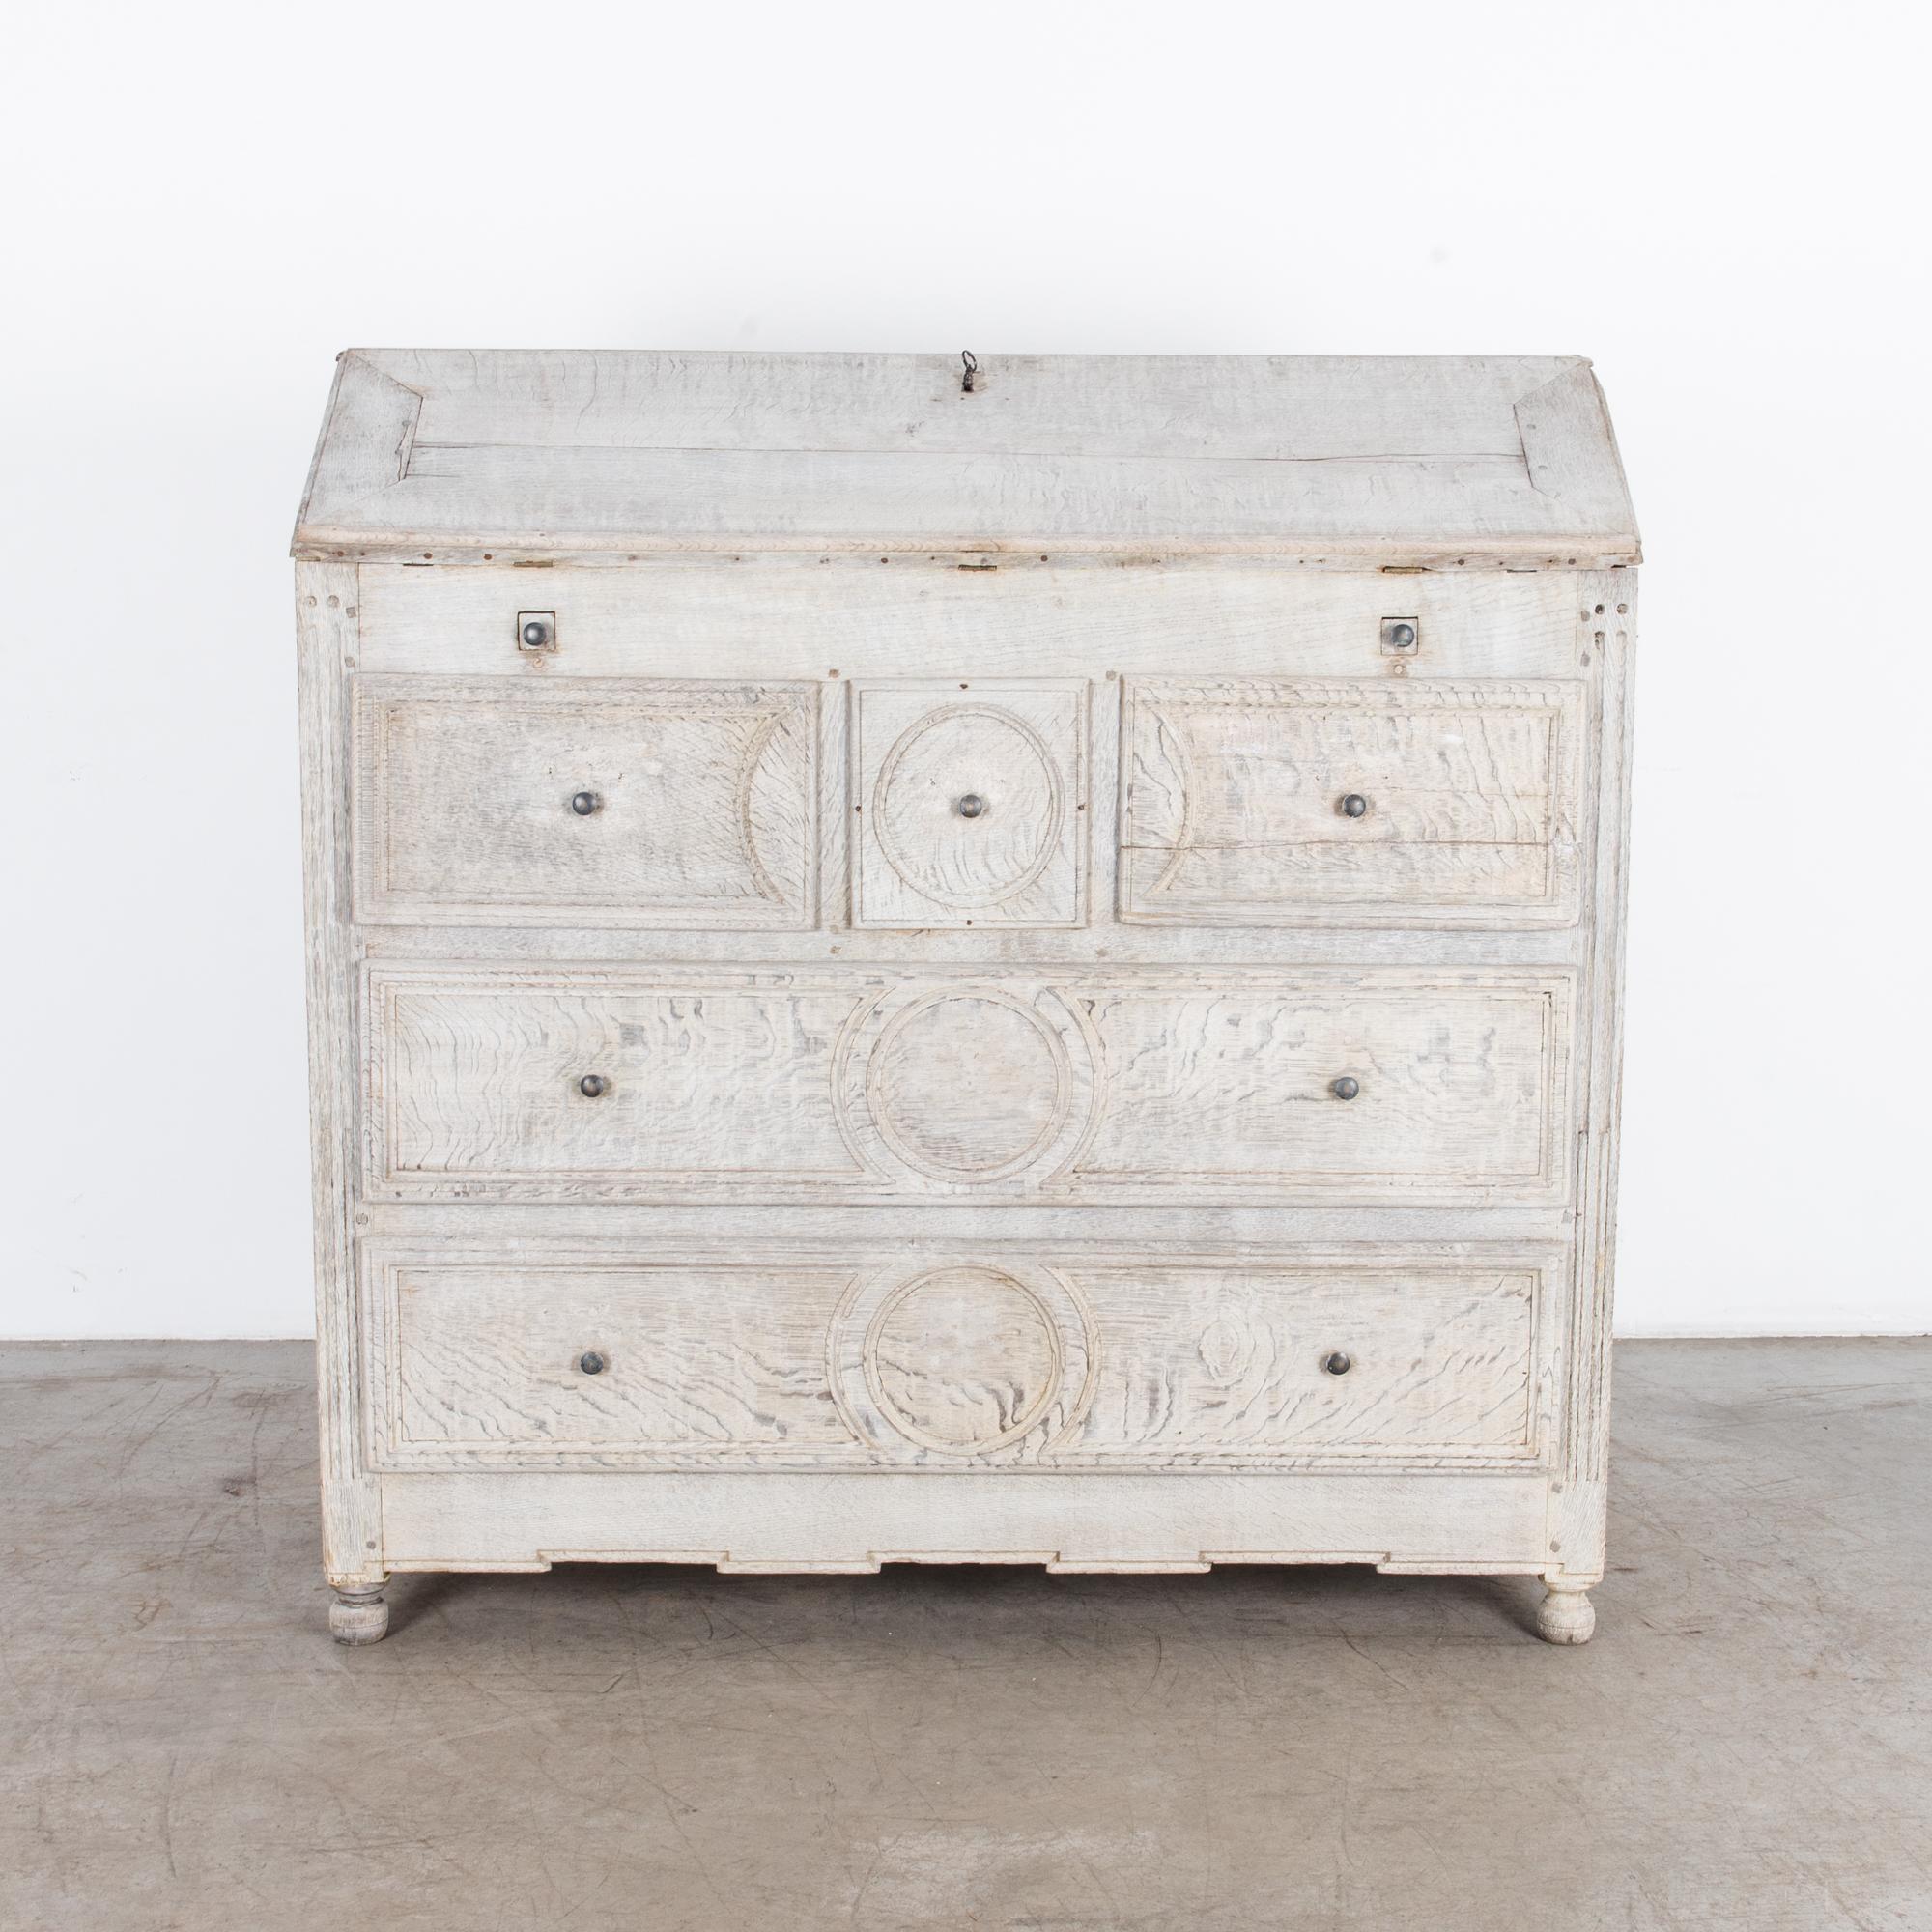 A Louis the 16th era “secrétaire” from France, circa 1820. With two lower and three upper drawers, a foldable desktop and small inset drawers this cabinet is true to its name with plenty of handy storage space. With period details, this adjustable